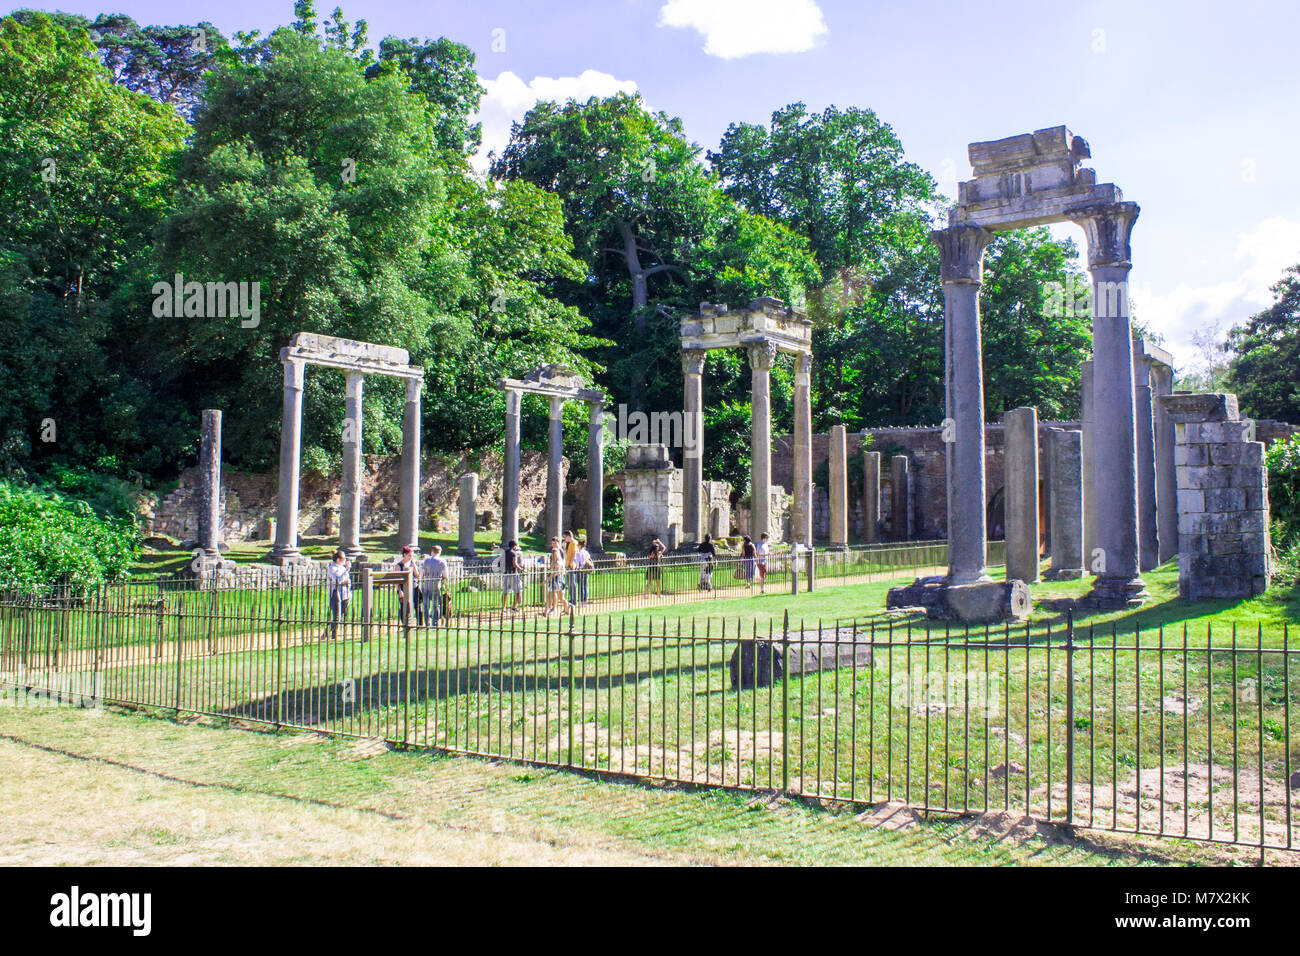 WINDSOR, UK -28th Aug 2016: Ruins from the roman City of Leptis Magna is on display to tourists at the Windsor Great Park in Windsor. Stock Photo